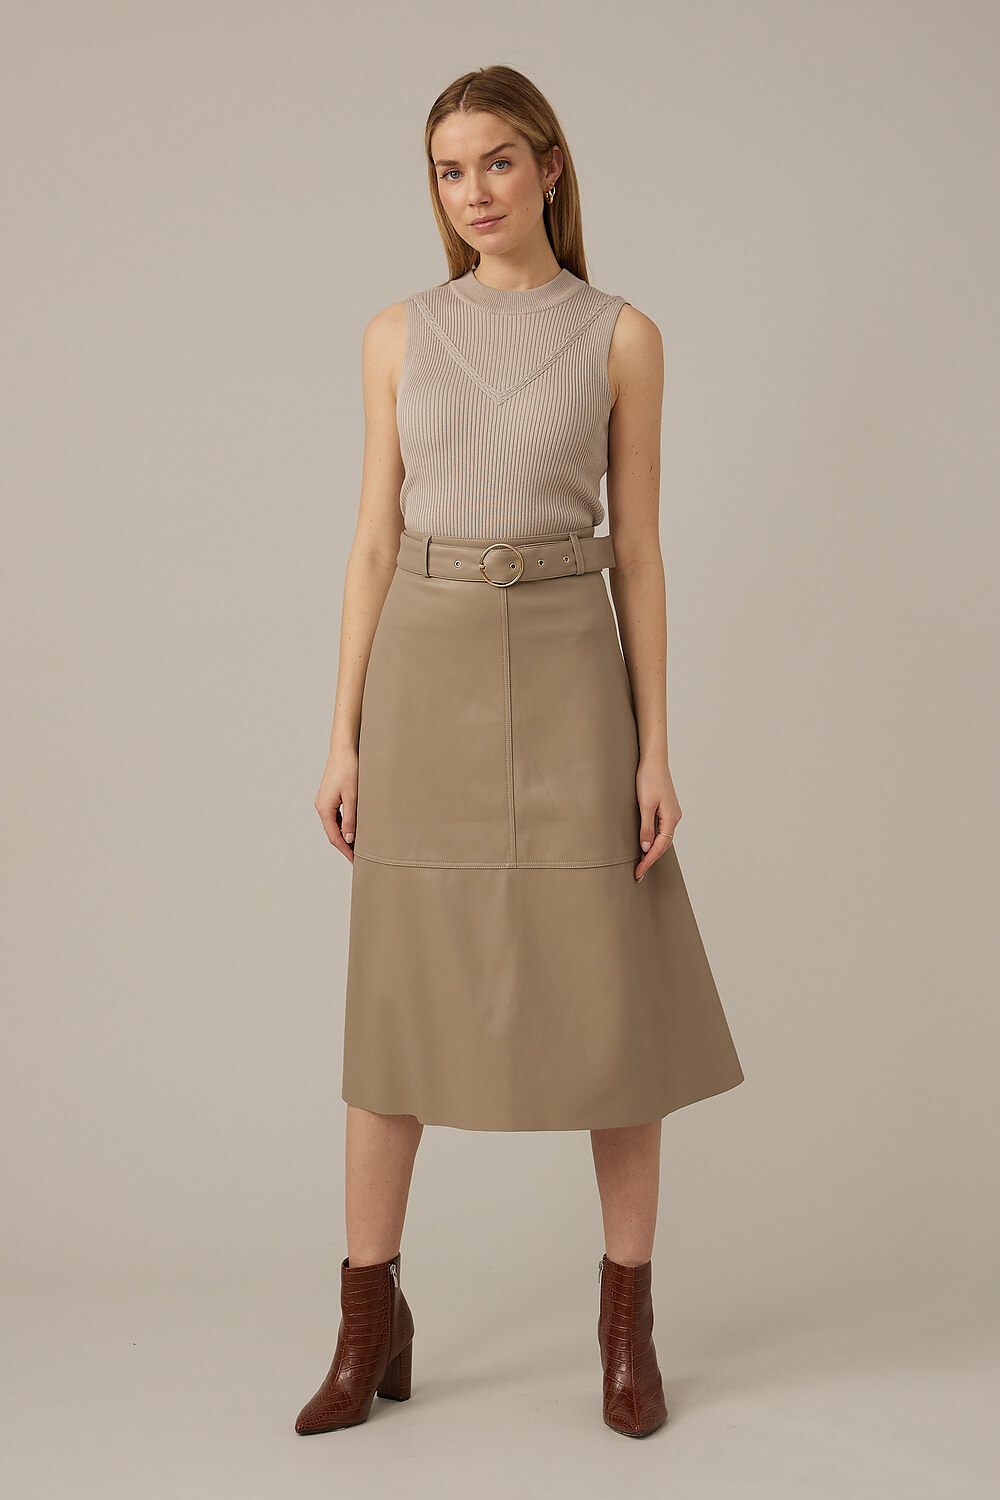 Emproved Vegan Leather Midi Skirt Style A2264. Taupe